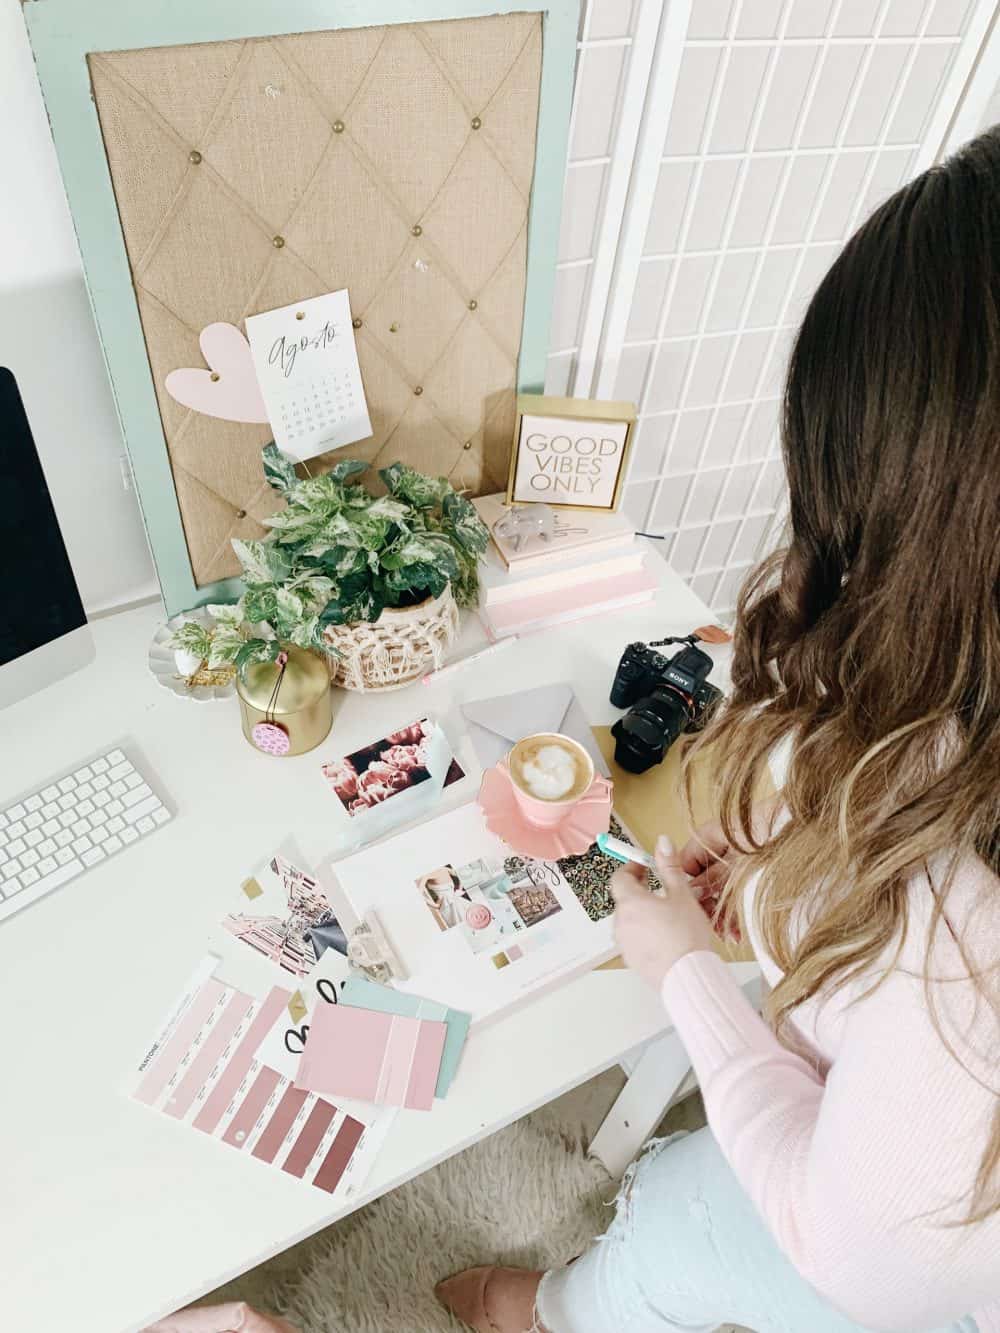 How to create graphics for your blog - Branding process on a pink desk with candles, coffee, Pantone colors and plants